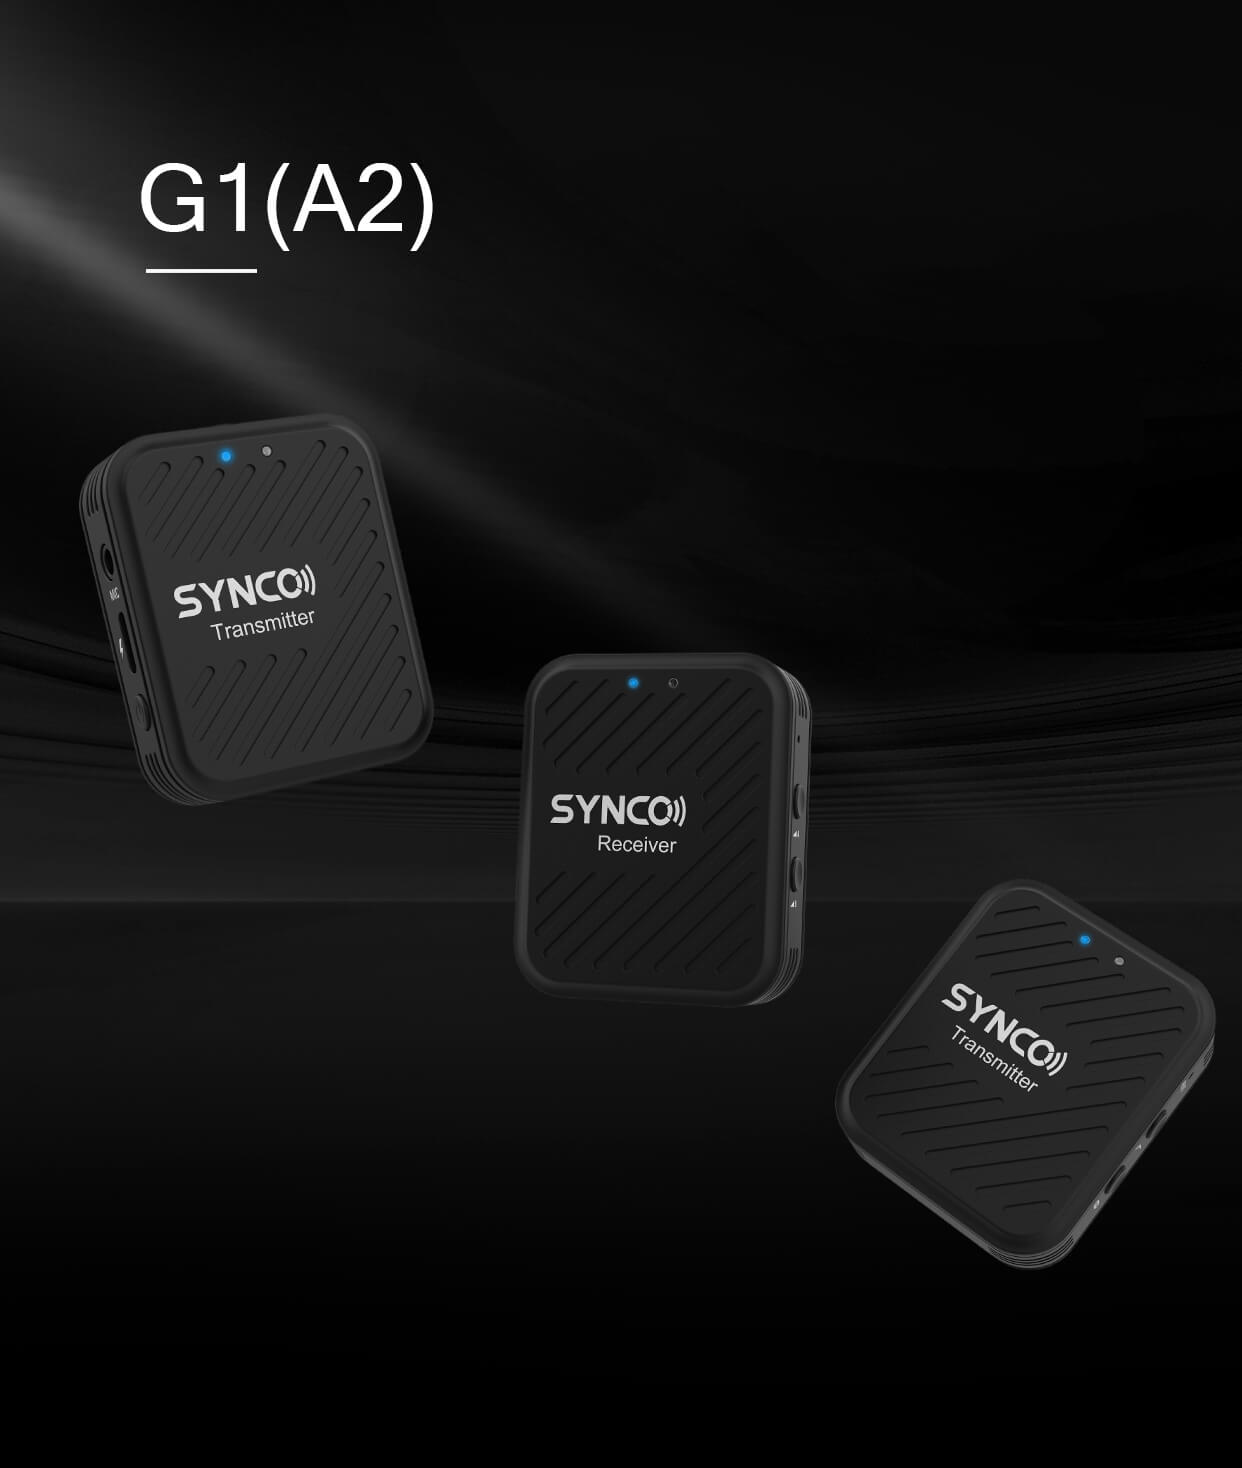 1-Trigger-2 Wireless Stereo Microphone at 2.4 GHz SYNCO G1(A2) | SYNCO